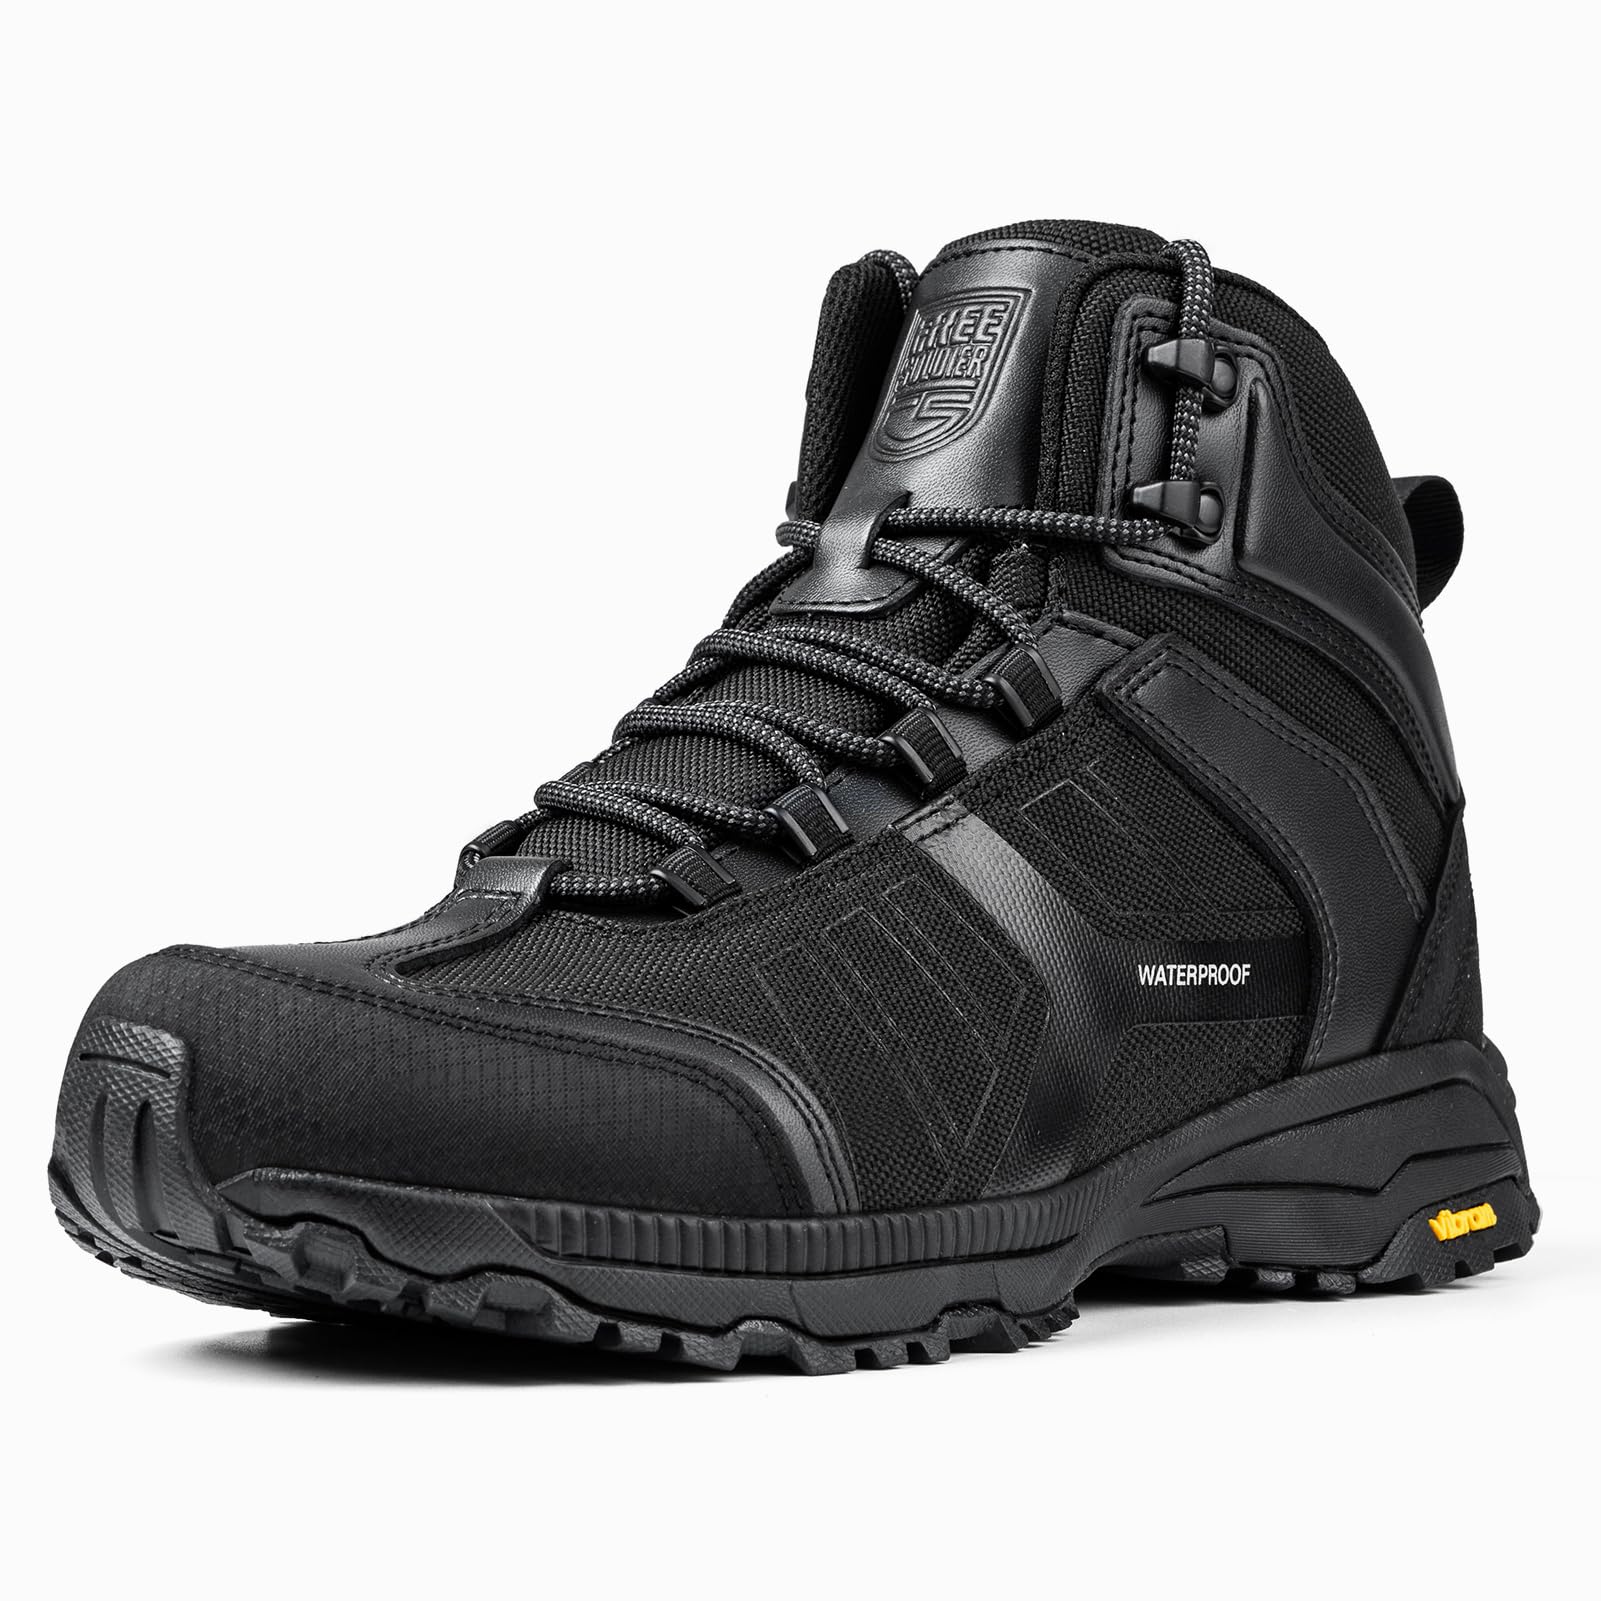 Black Panther Low-Cut Military Tactical Boots - FreeSoldier